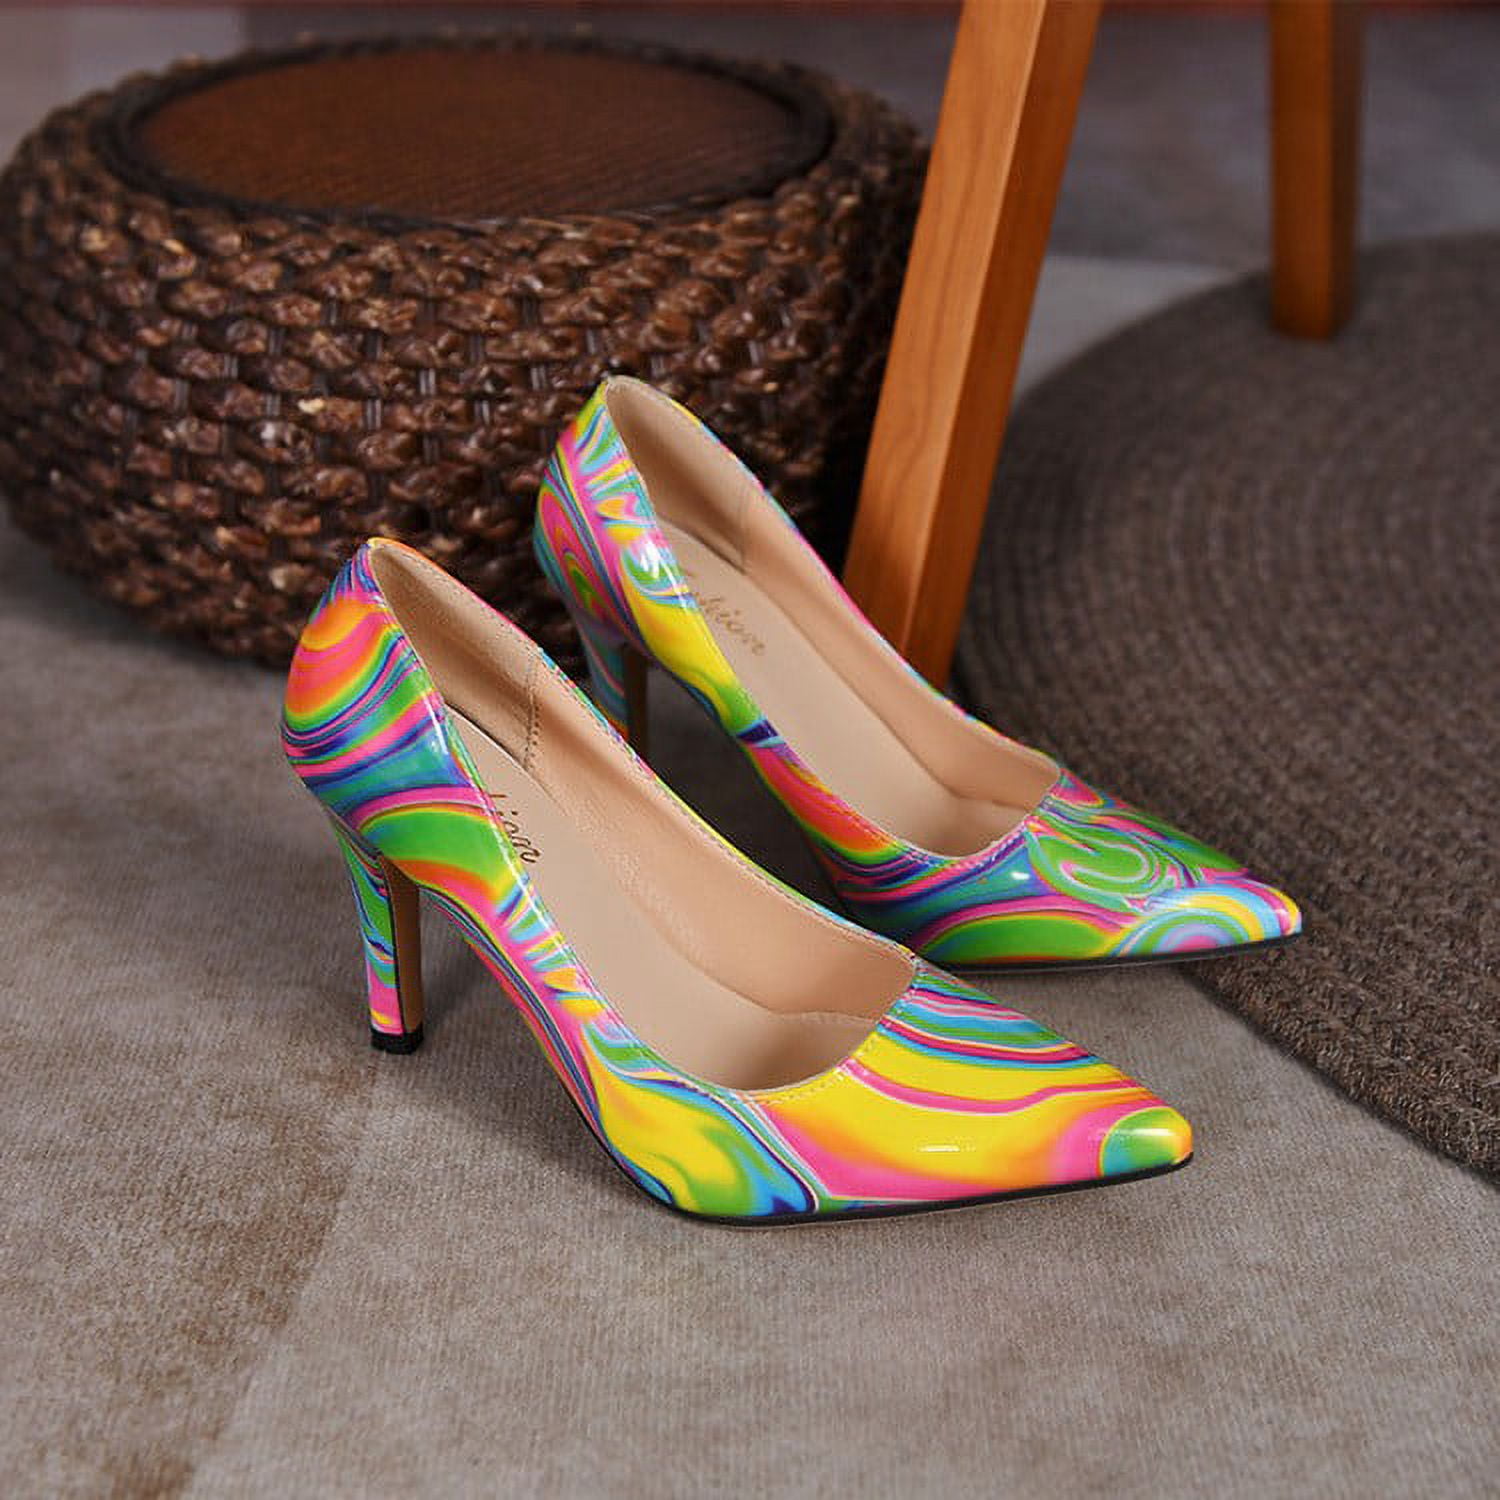 Sexy Shoes Peep Toe Stiletto Heels Glossy Multicolor Patent Ankle Buckle  Straps Platforms Pumps - Black LightBlue in Sexy Heels & Platforms - $65.99